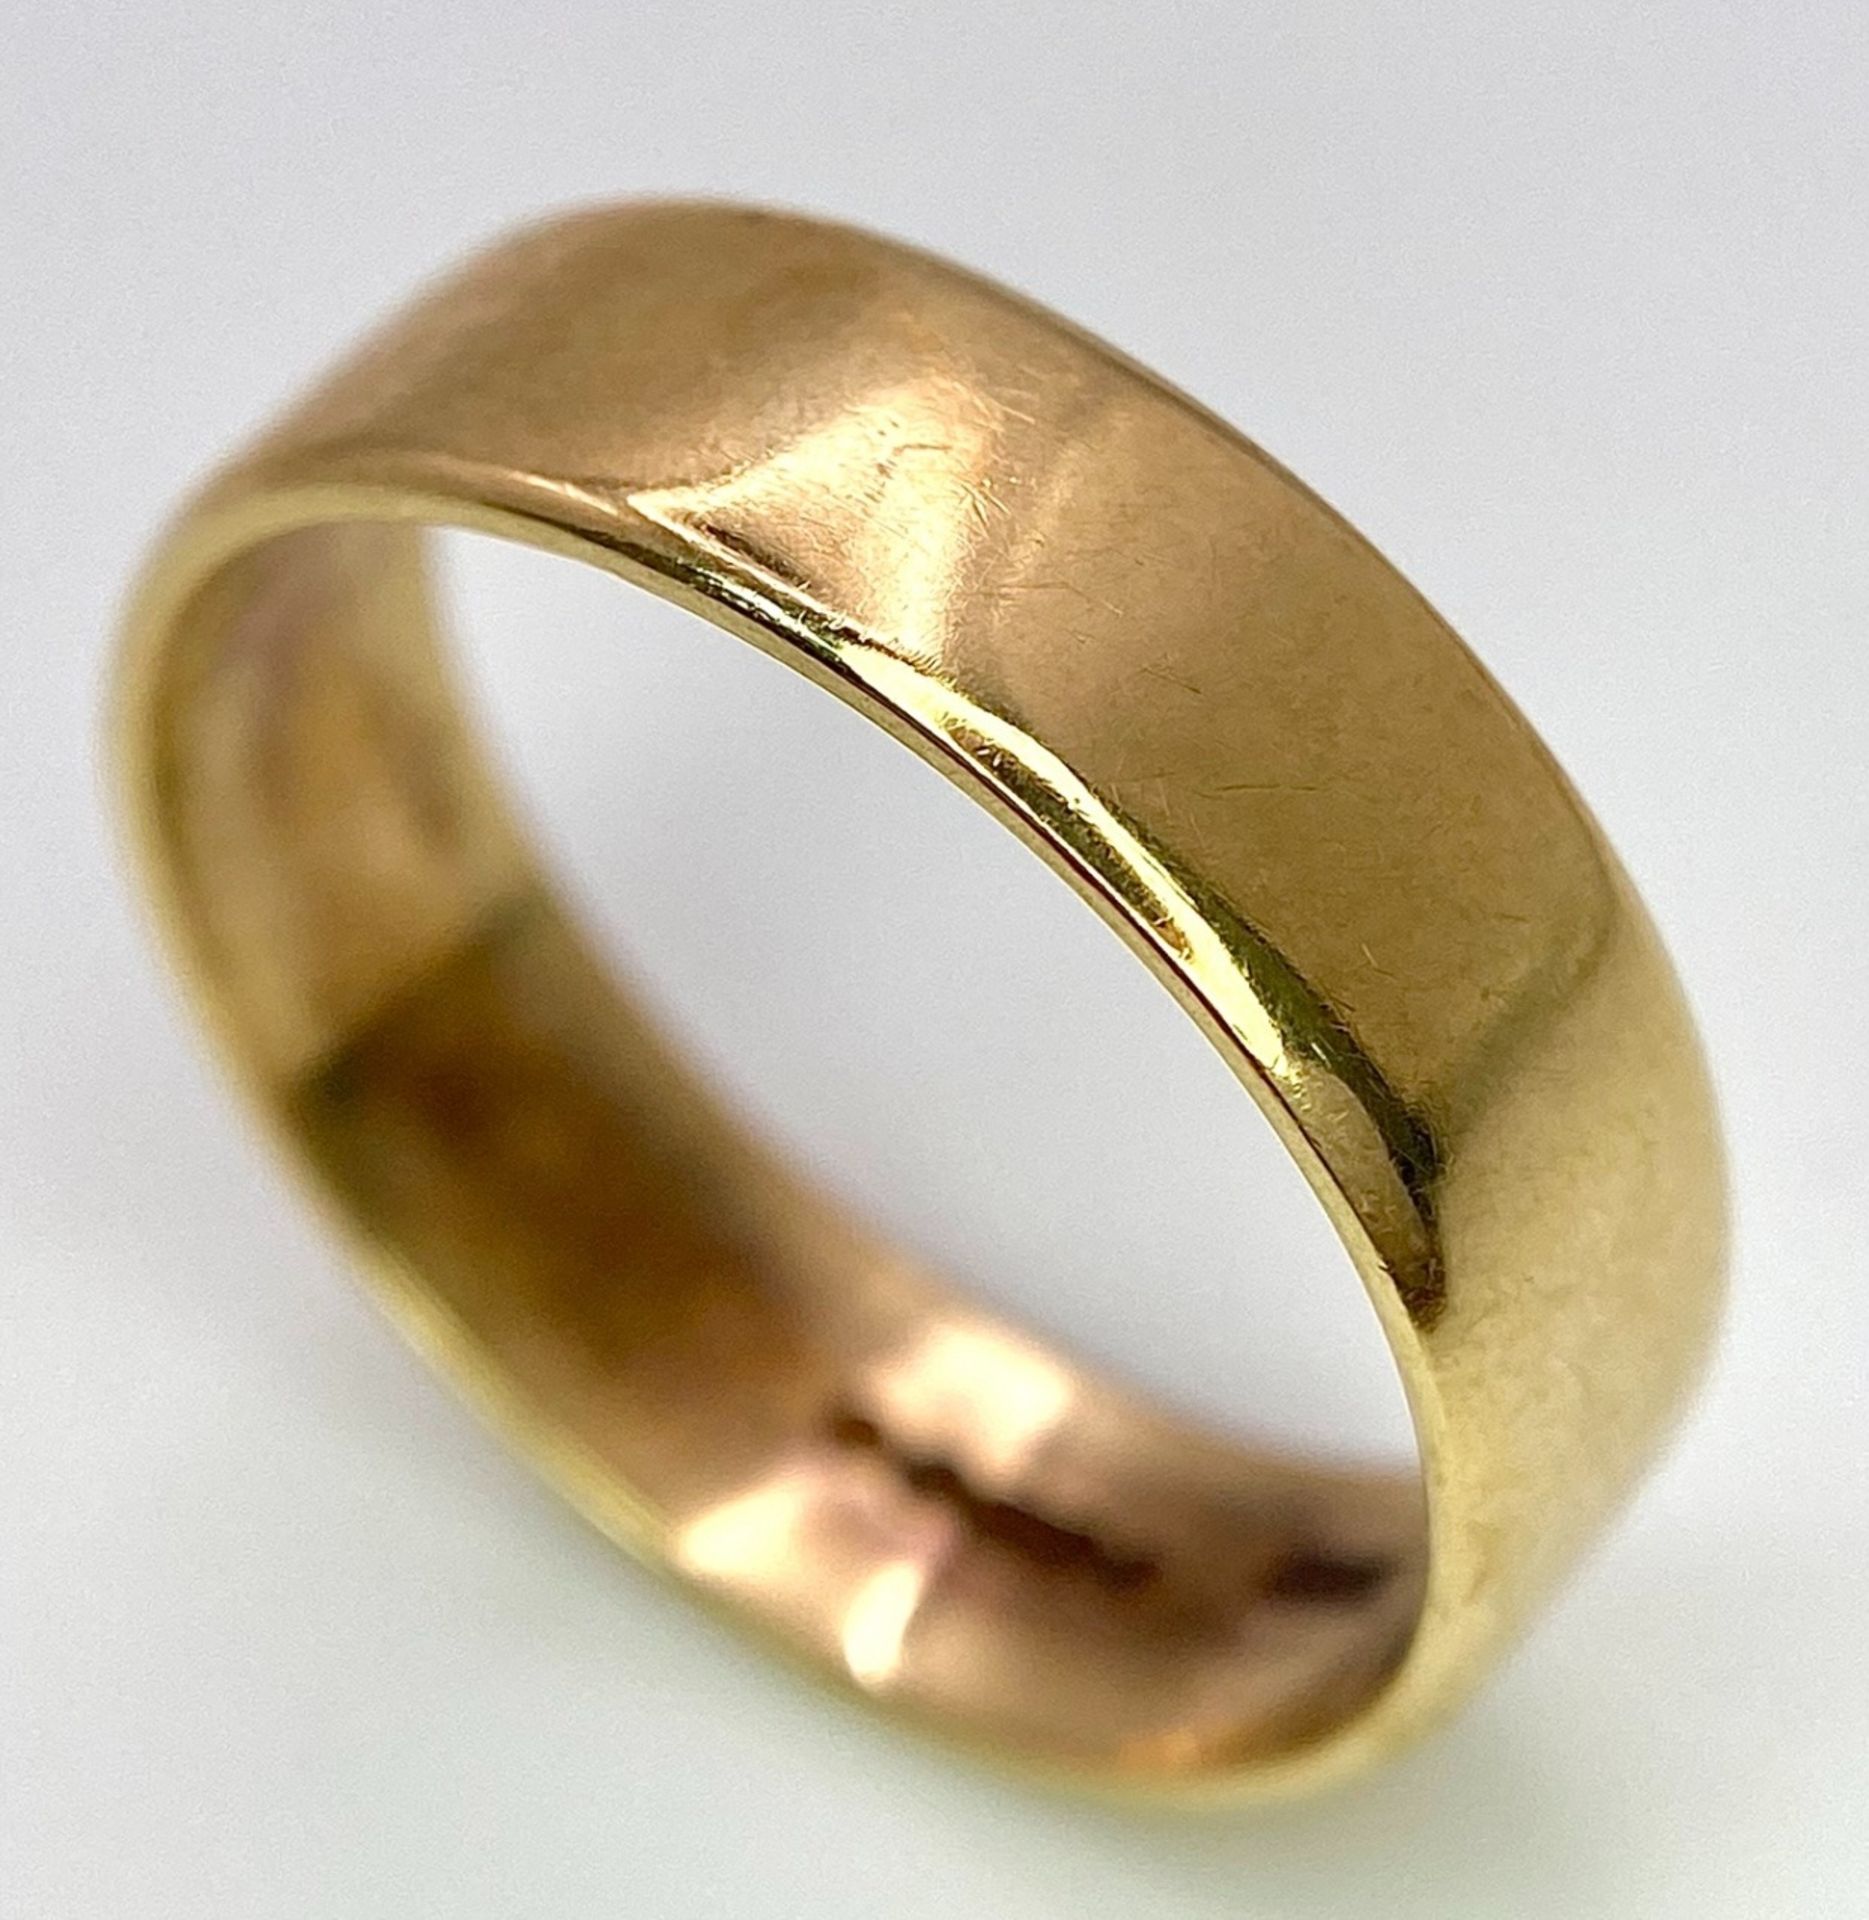 A Vintage 9K Yellow Gold Band Ring. 5mm width. 3.6g weight. Full UK hallmarks. - Image 5 of 6